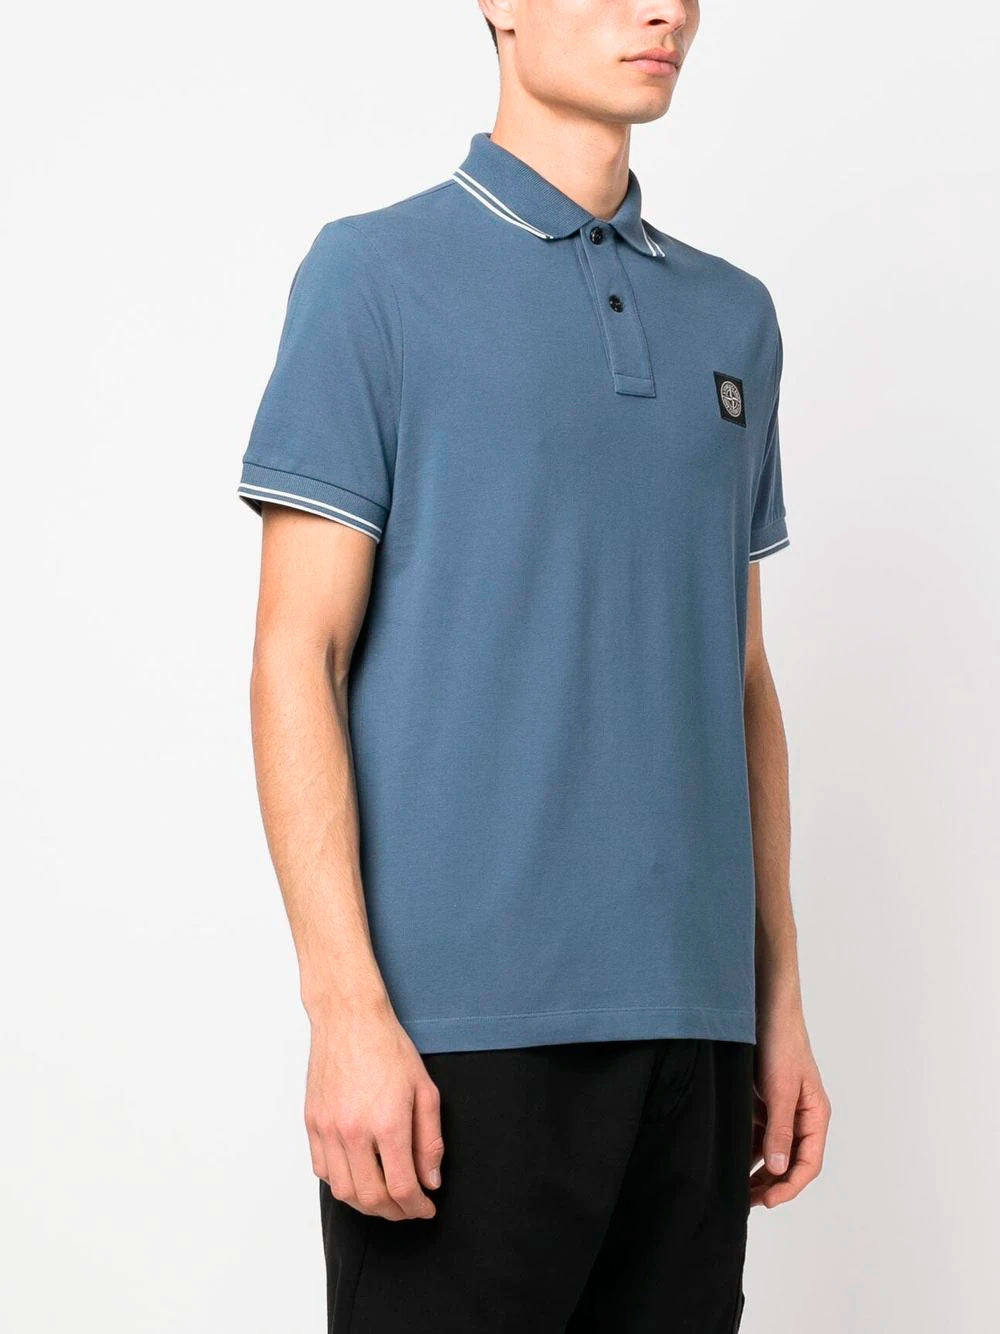 Compass-patch short-sleeved polo shirt